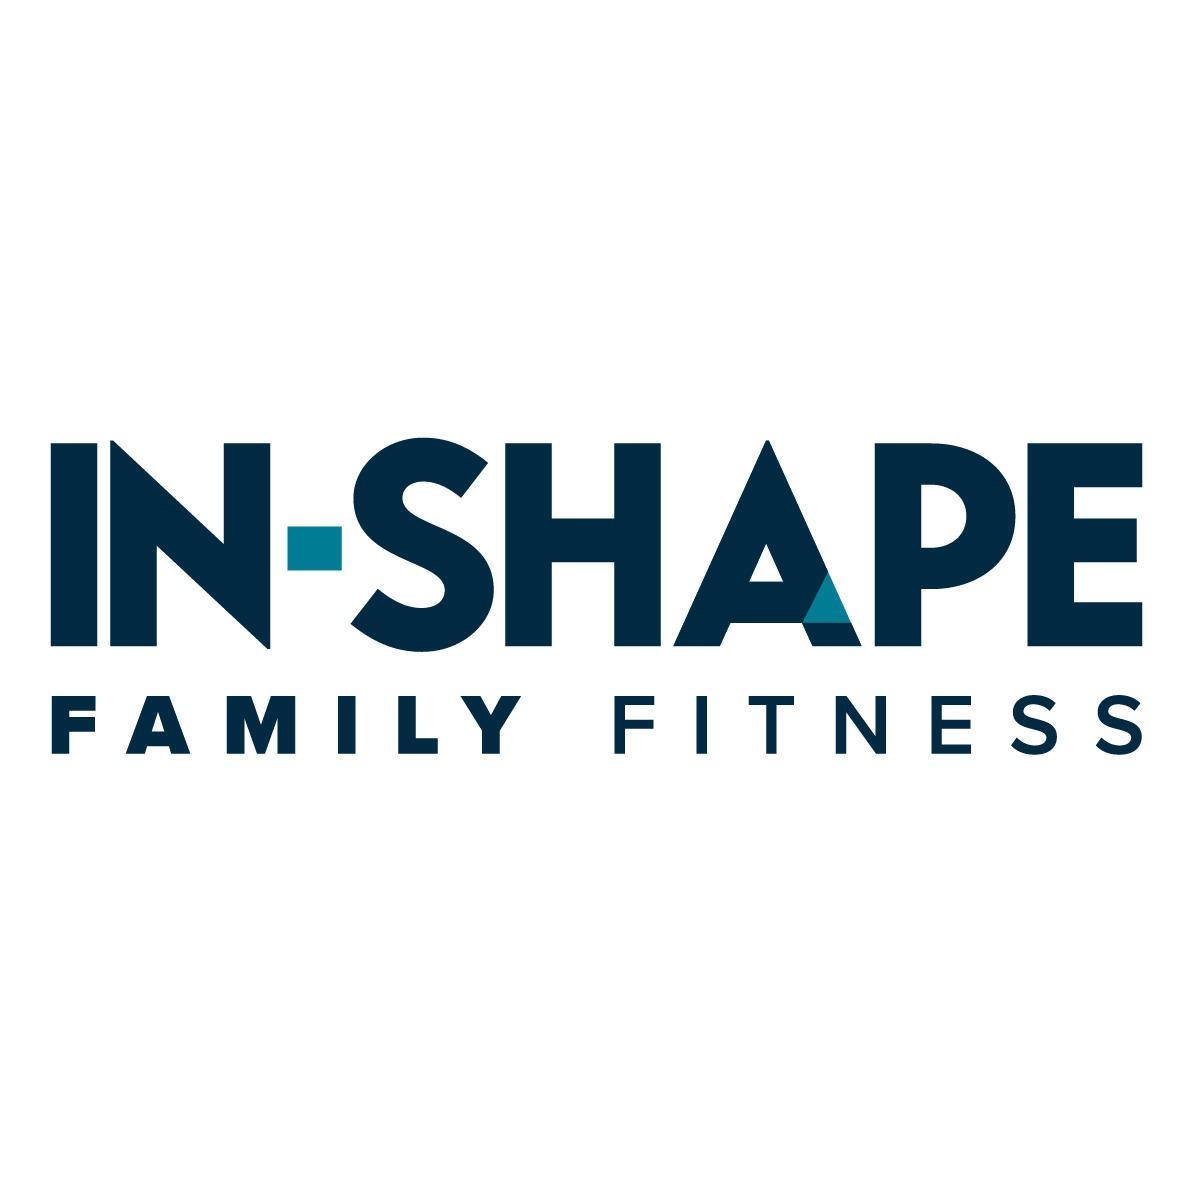 In-Shape Family Fitness - Merced, CA 95340 - (209)316-3128 | ShowMeLocal.com